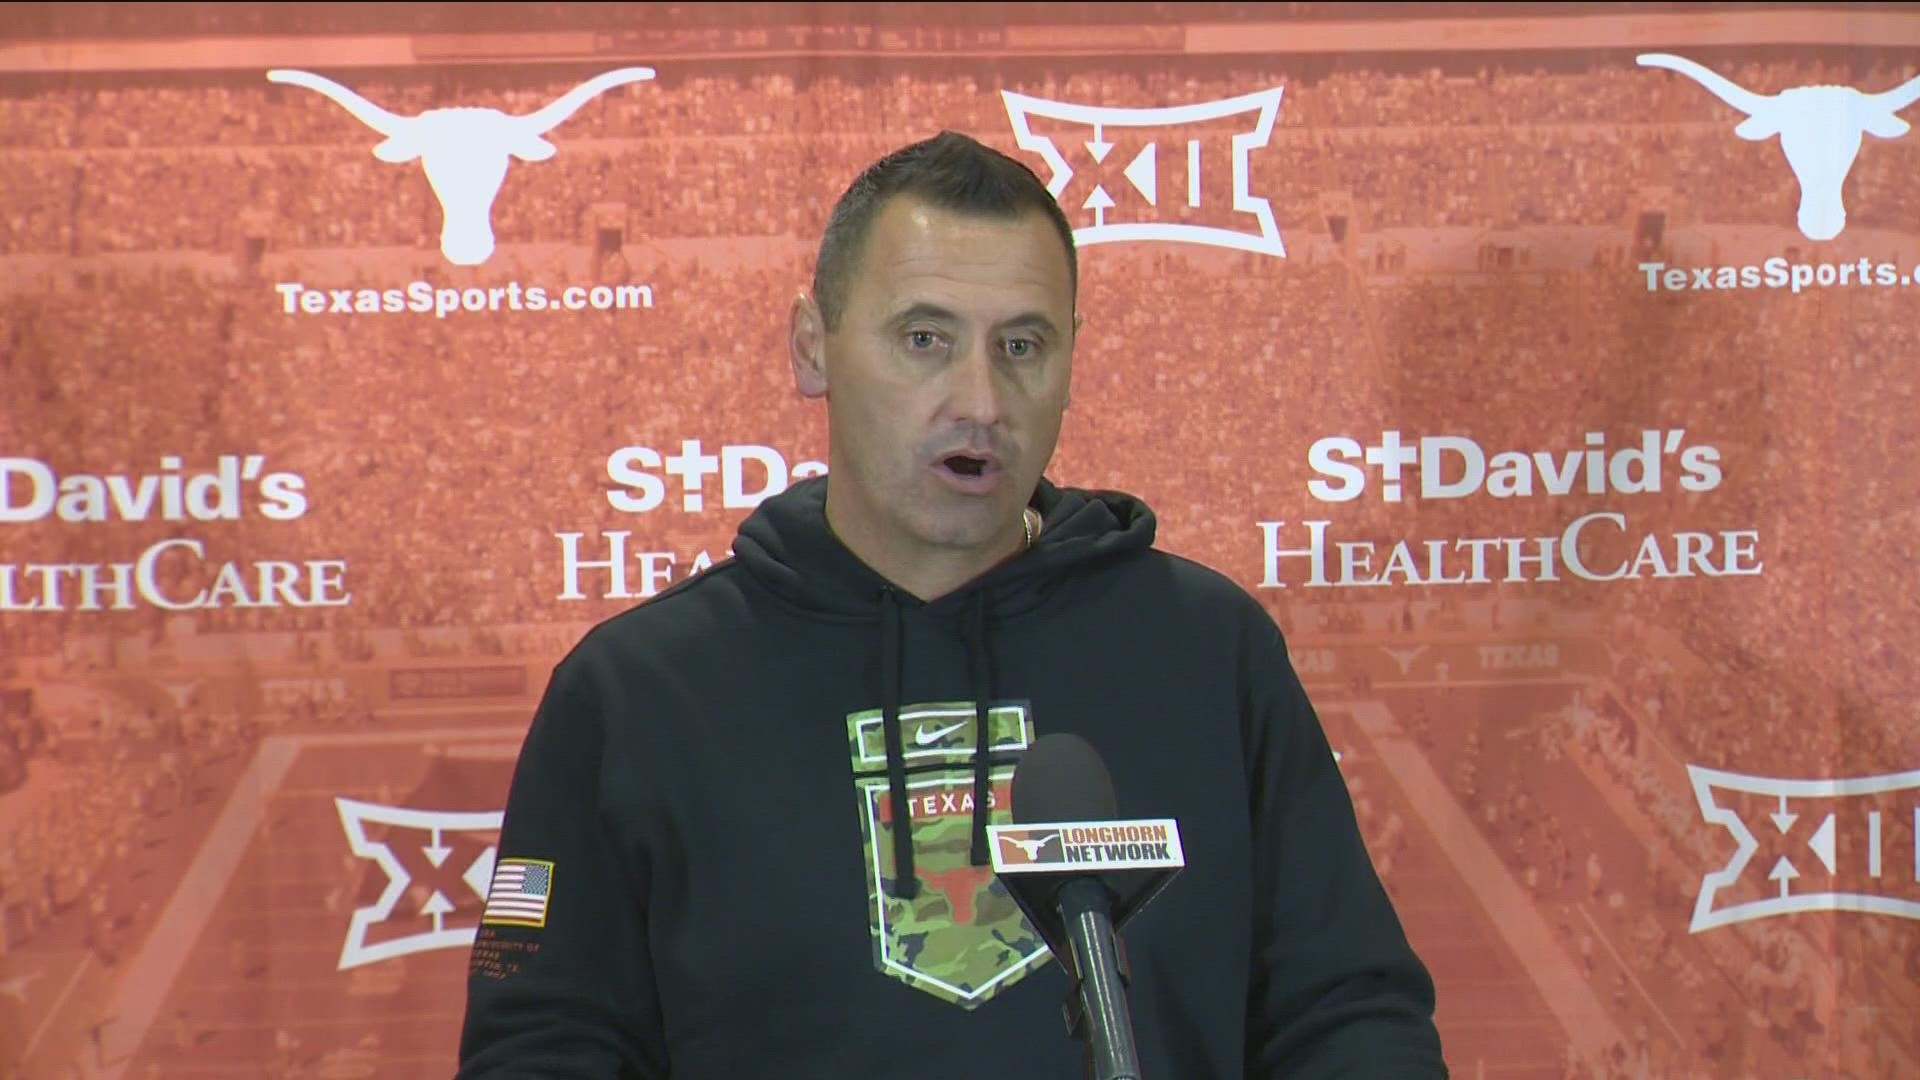 After winning on Friday, Coach Steve Sarkisian says they can worry about the Saturday night game.